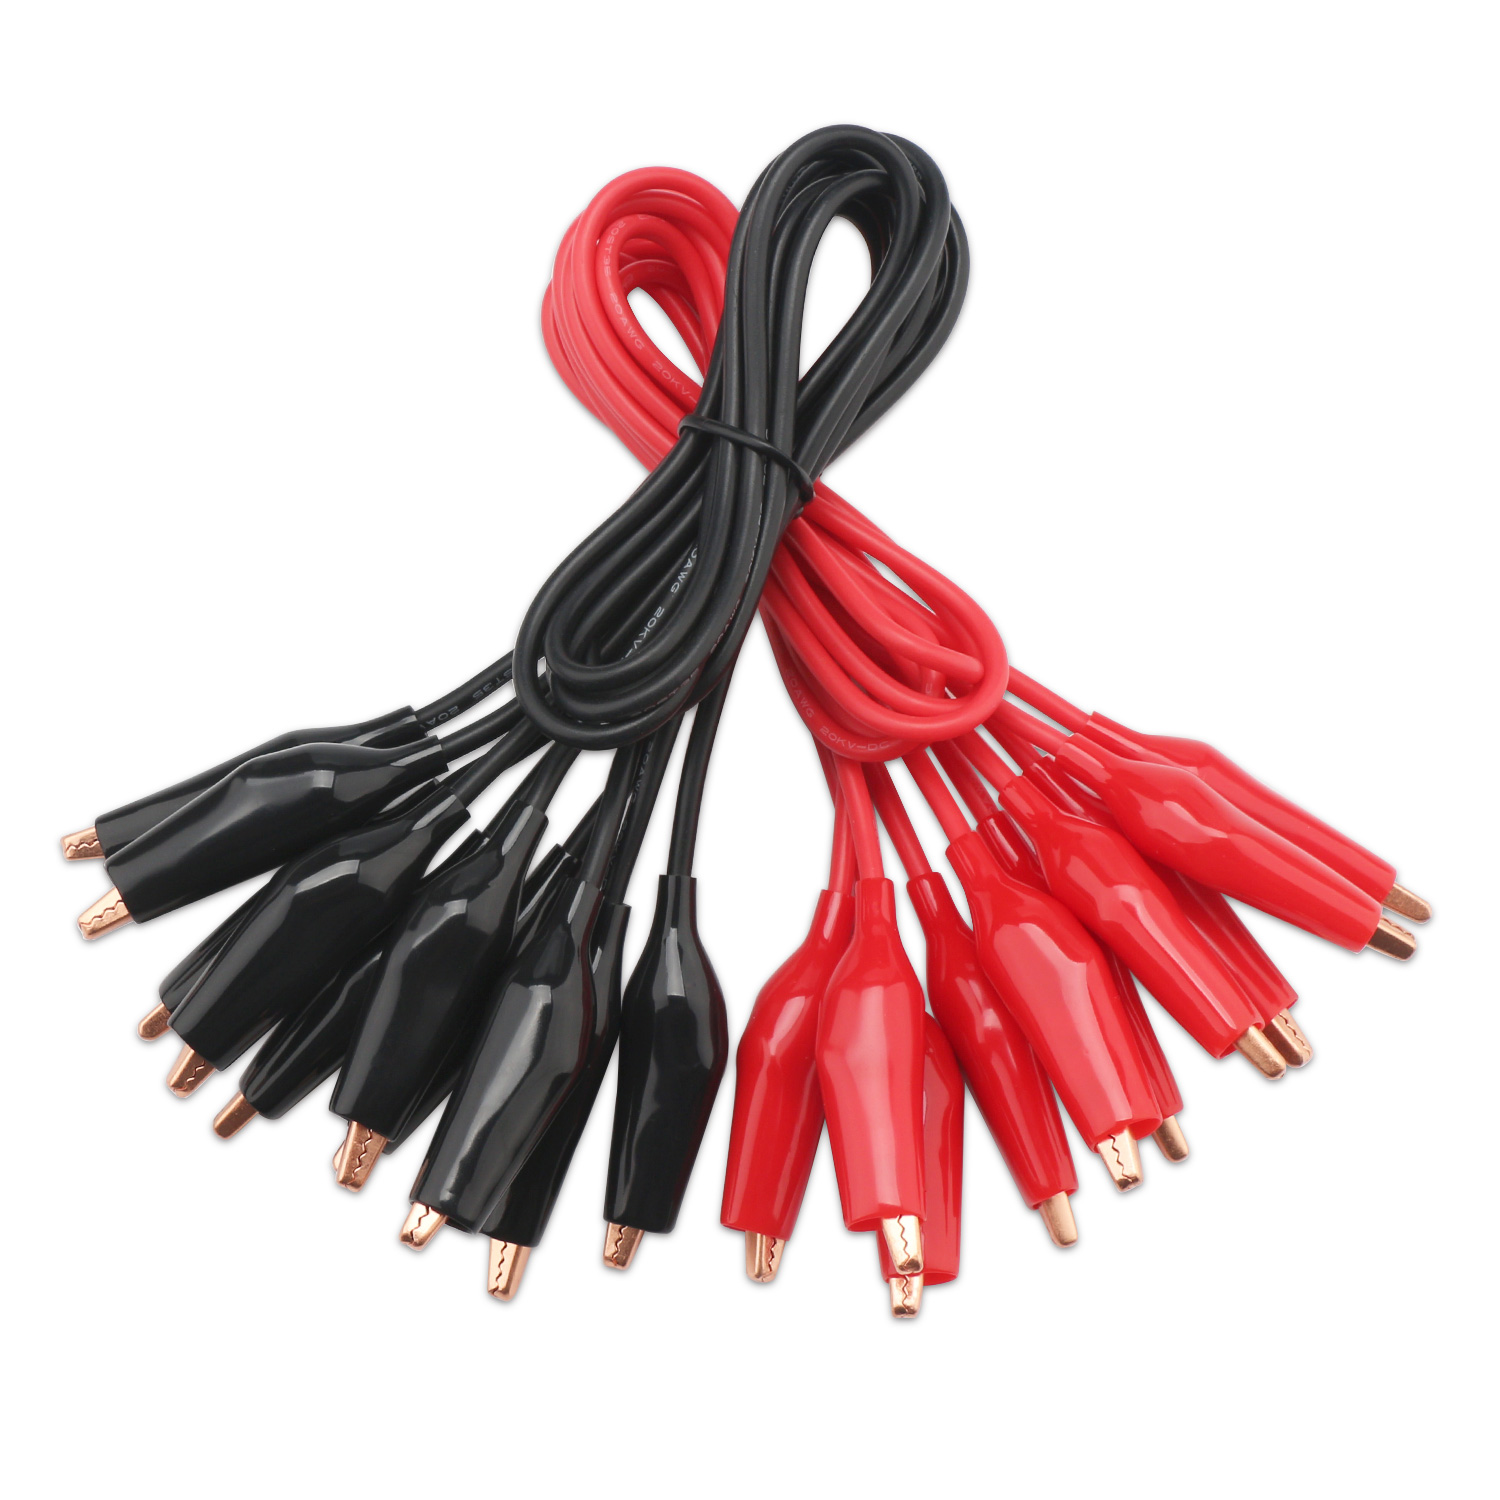 QLNE Alligator Clip Test Wires Gator Double-ended Jumper 5 Pcs 1M Clips Leads 